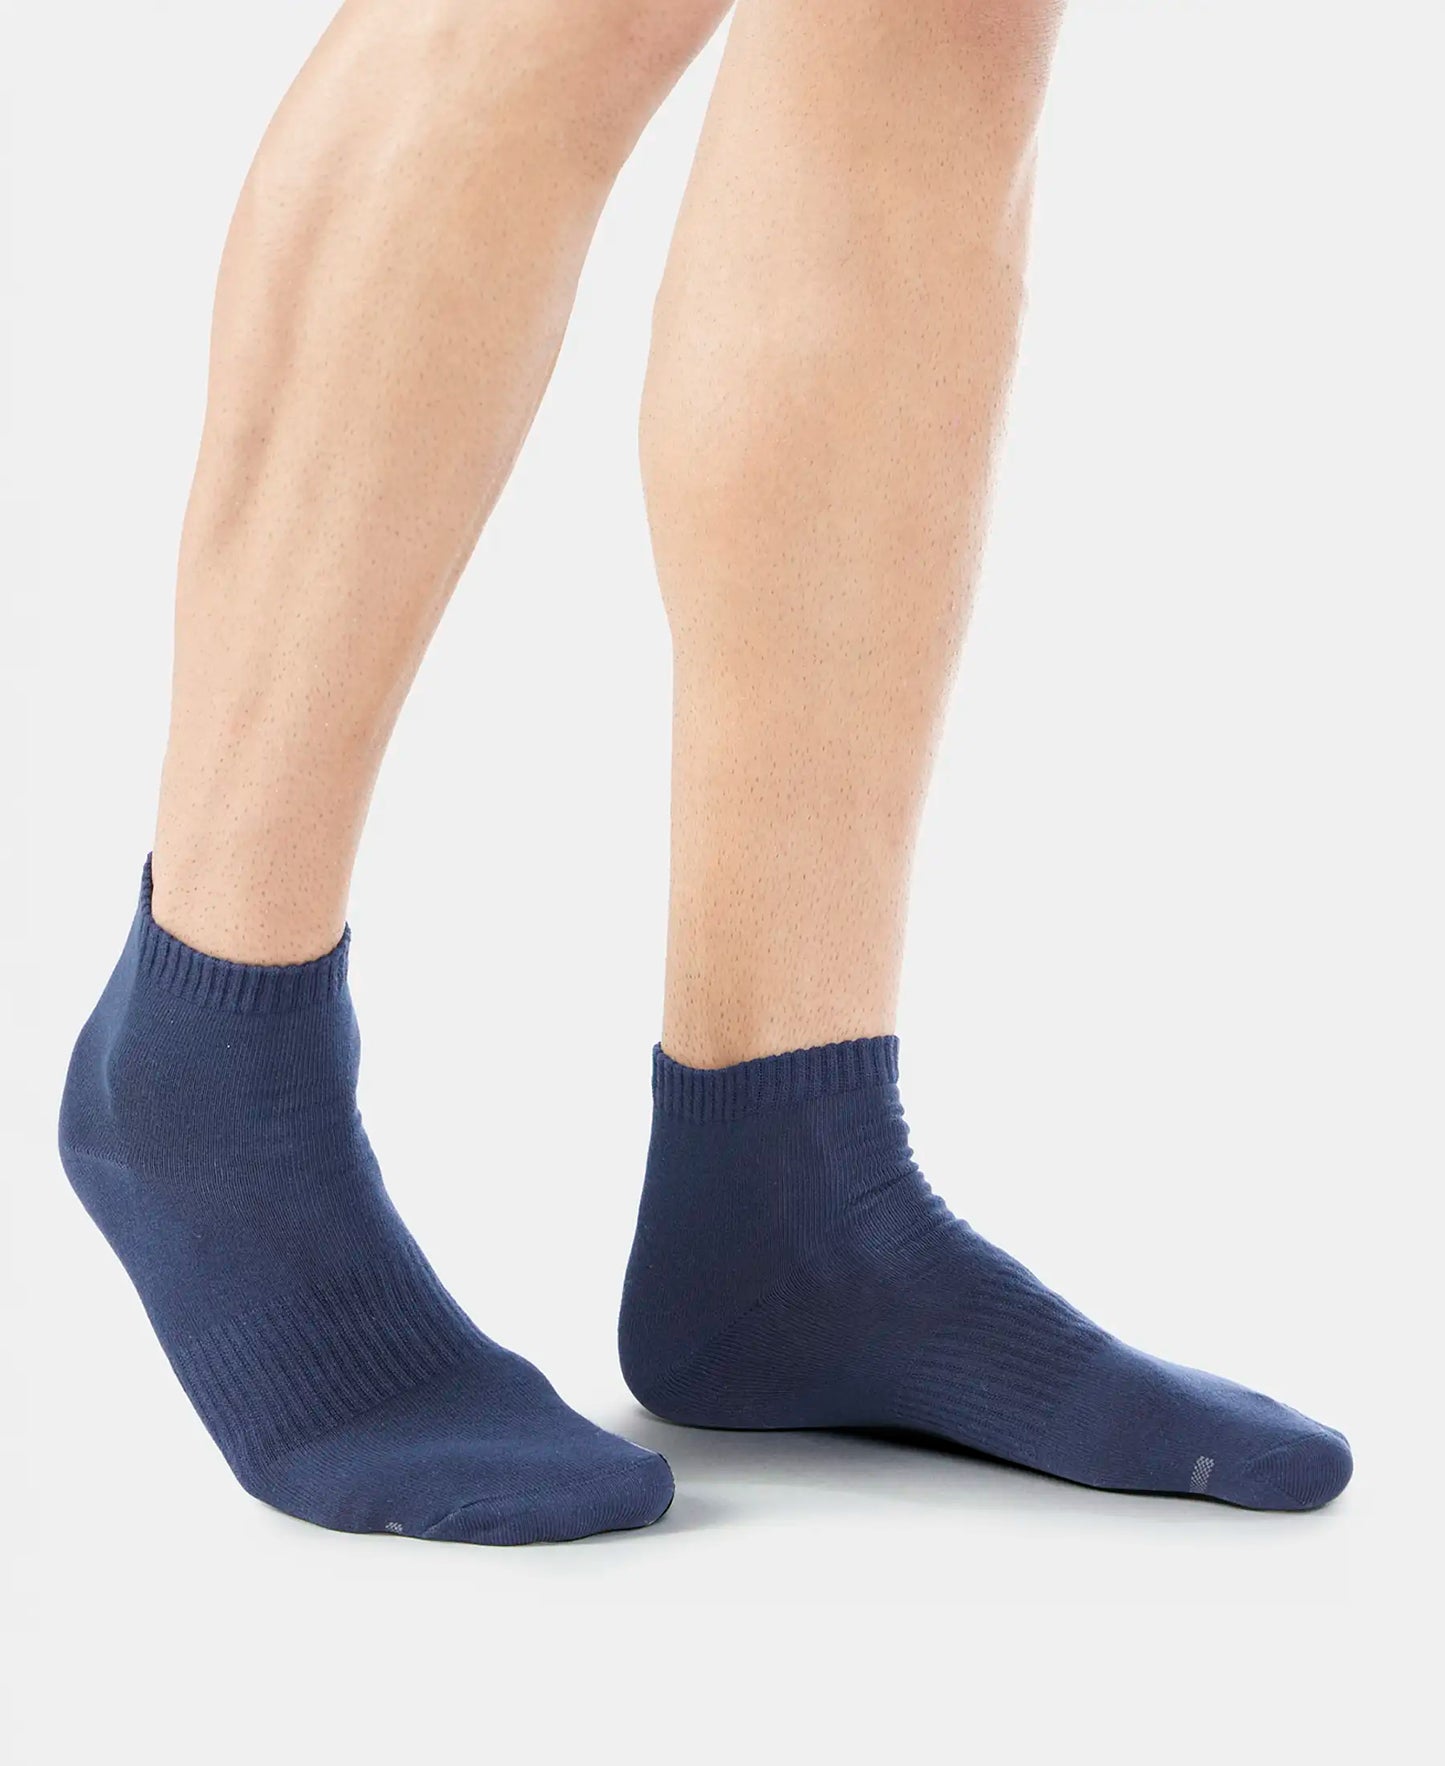 Compact Cotton Ankle Length Socks With StayFresh Treatment - Navy & Charcoal Melange-4